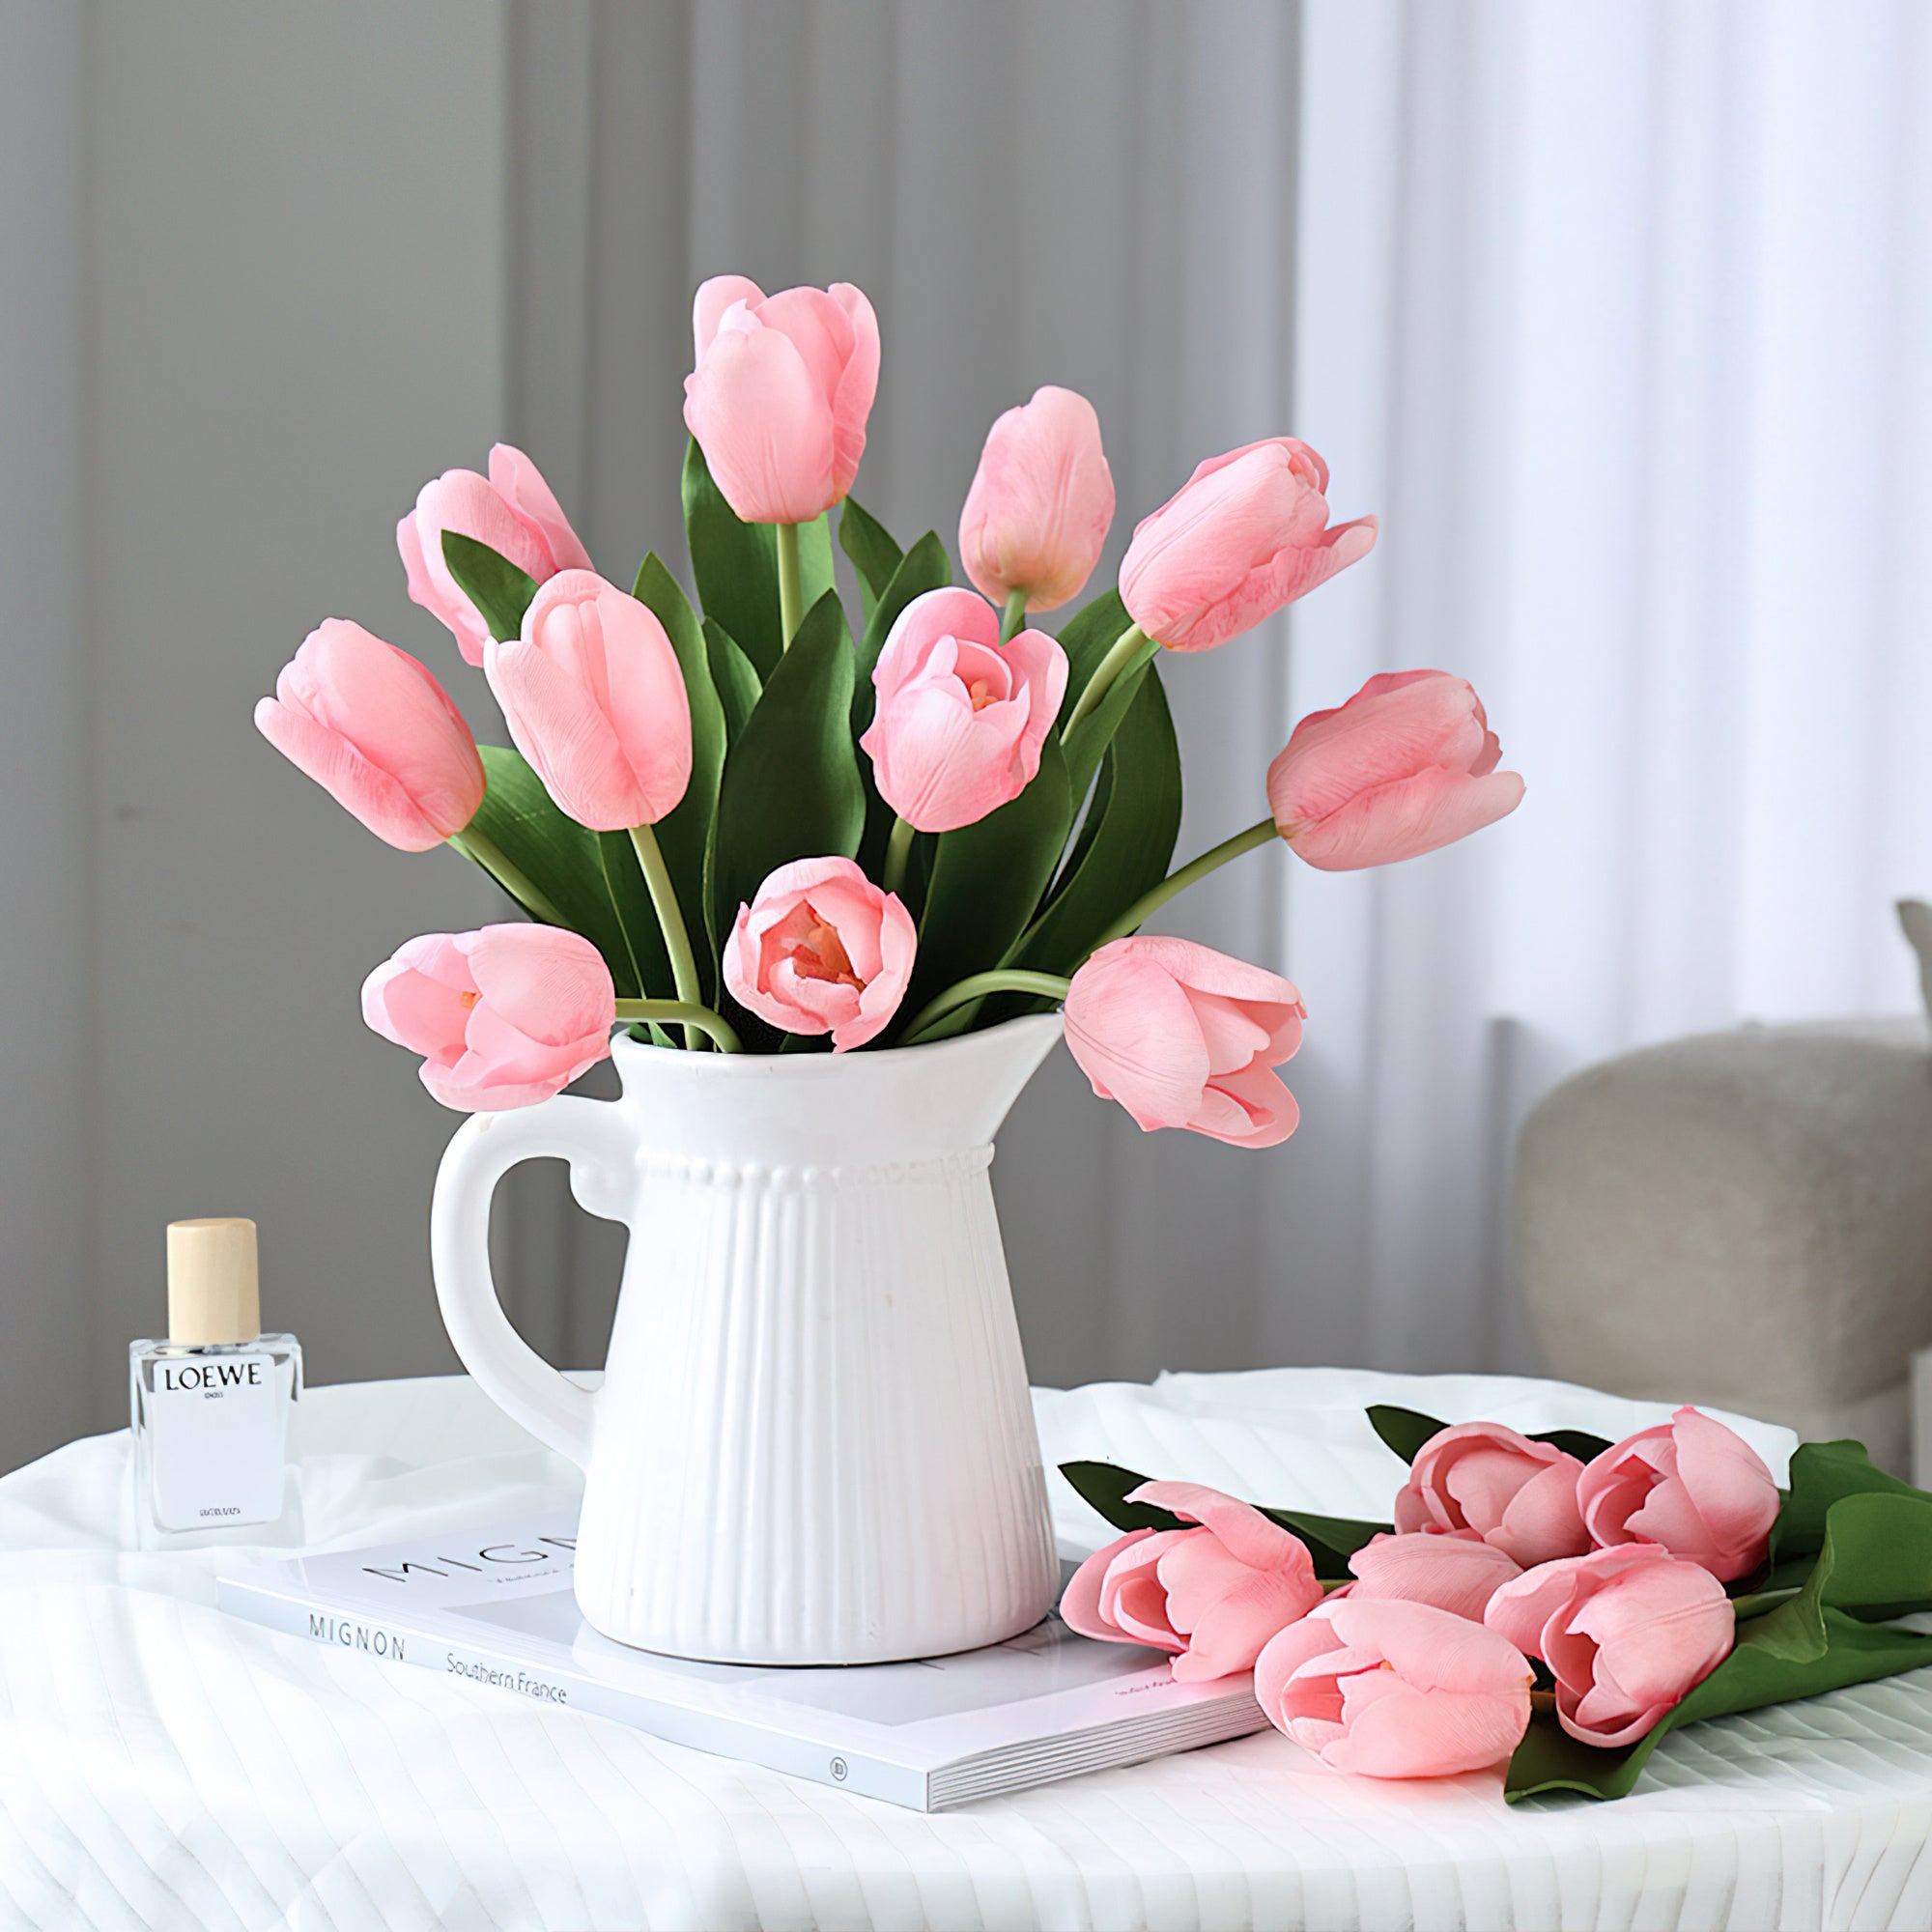 Moisture-Rich Touch Realistic Silk Tulips - Lifelike Multi-Hued Floral Bouquet for Sensory Home Decor